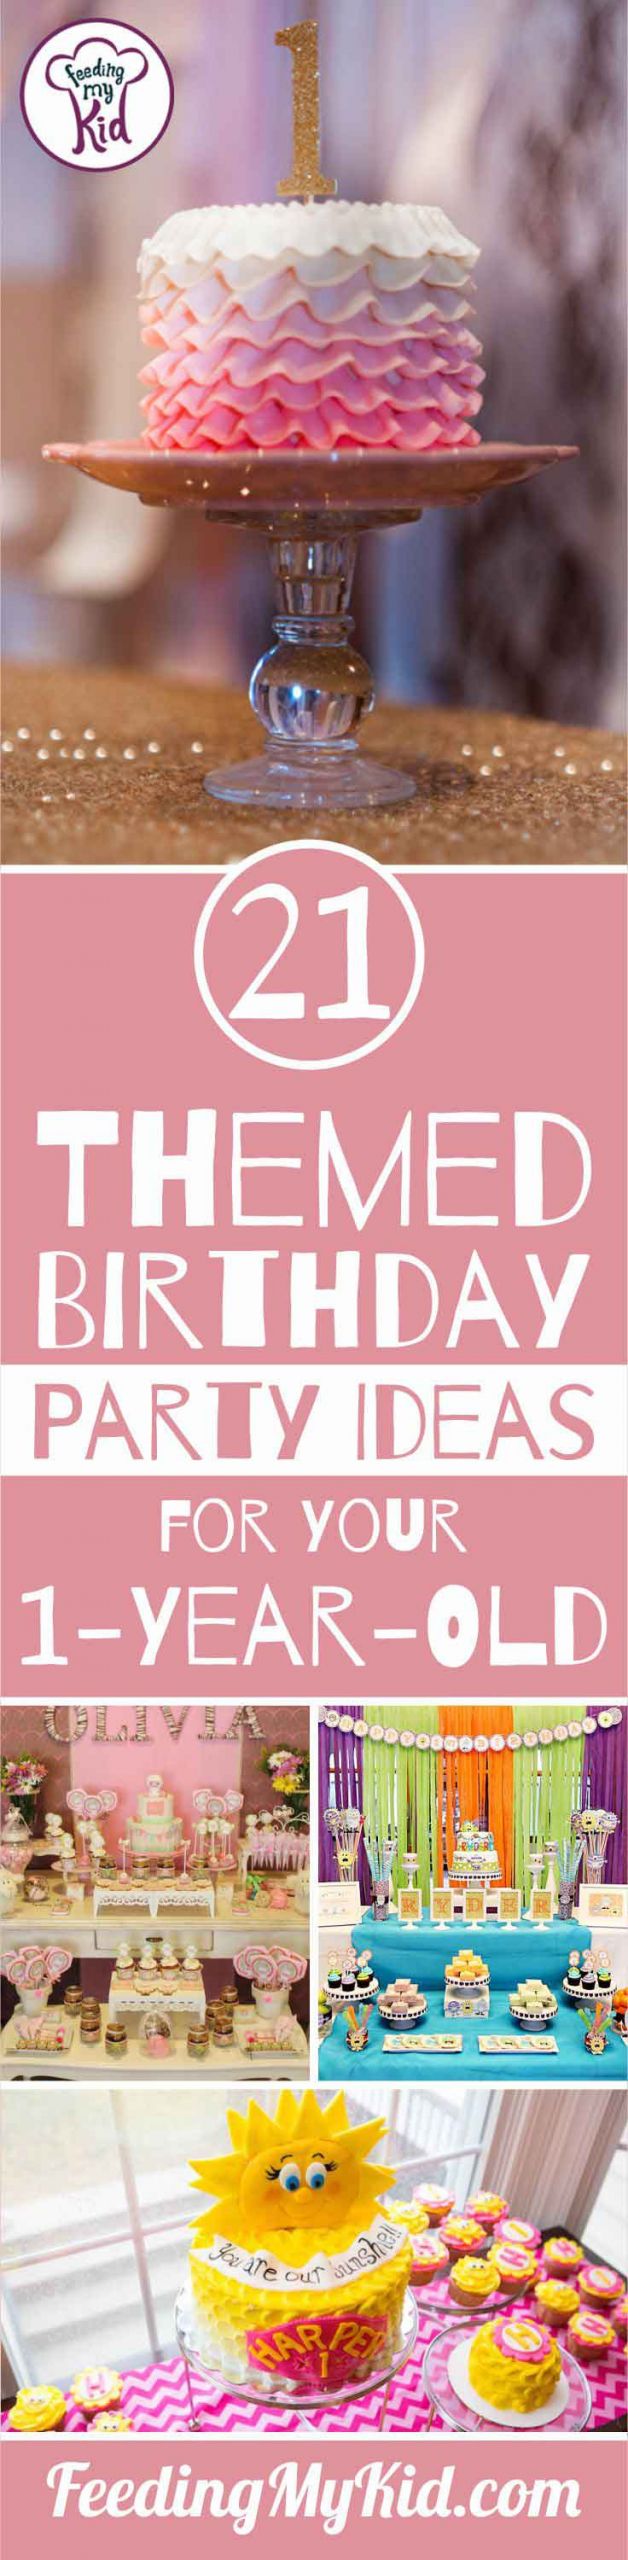 Ideas For 1 Year Old Birthday Party
 Birthday Party Themes for Your e Year Old Unfor table